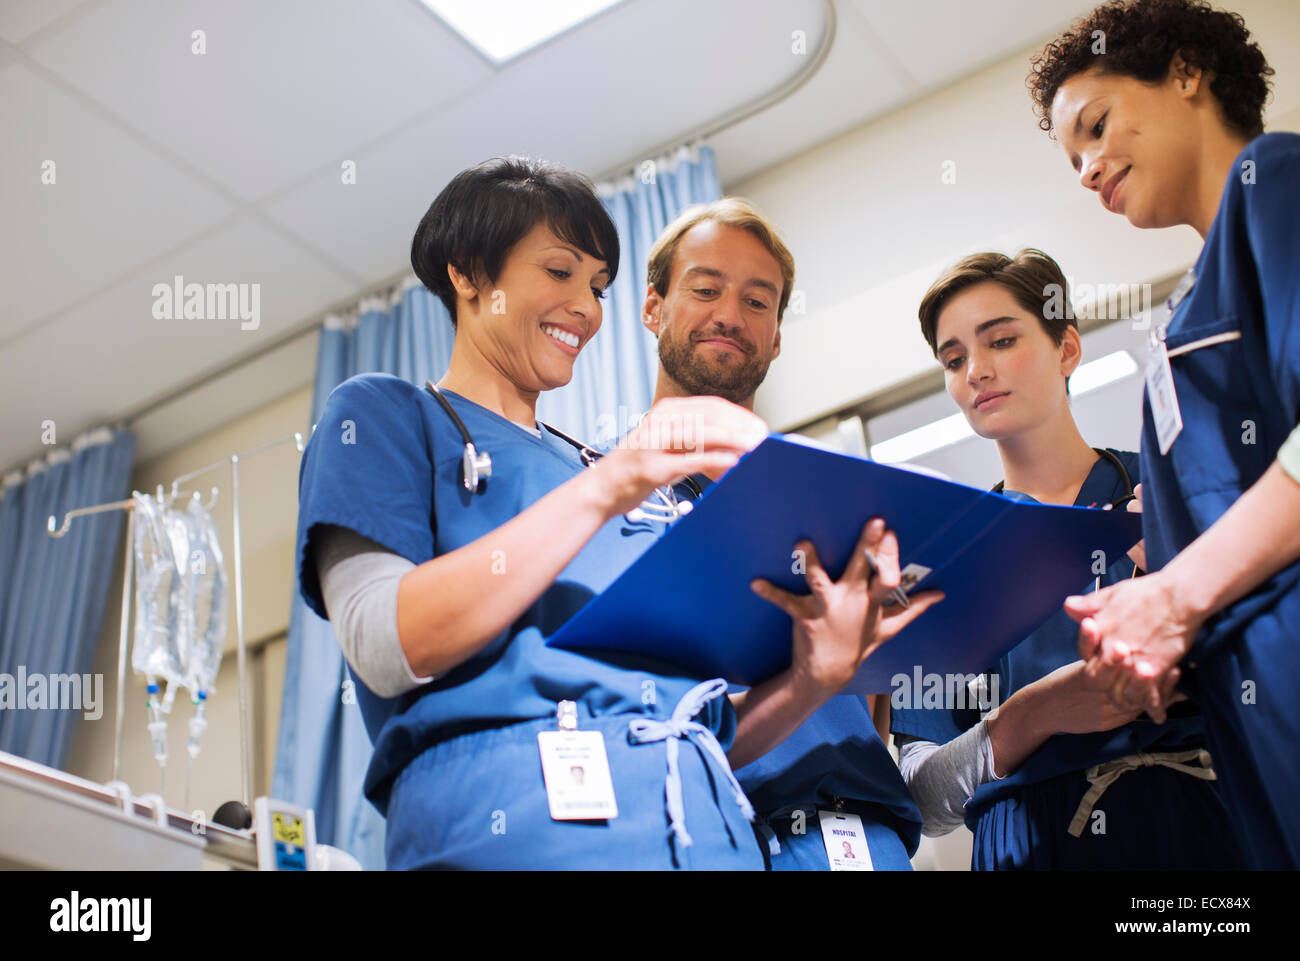 Doctors wearing scrubs, looking at documents in hospital ward Stock Photo